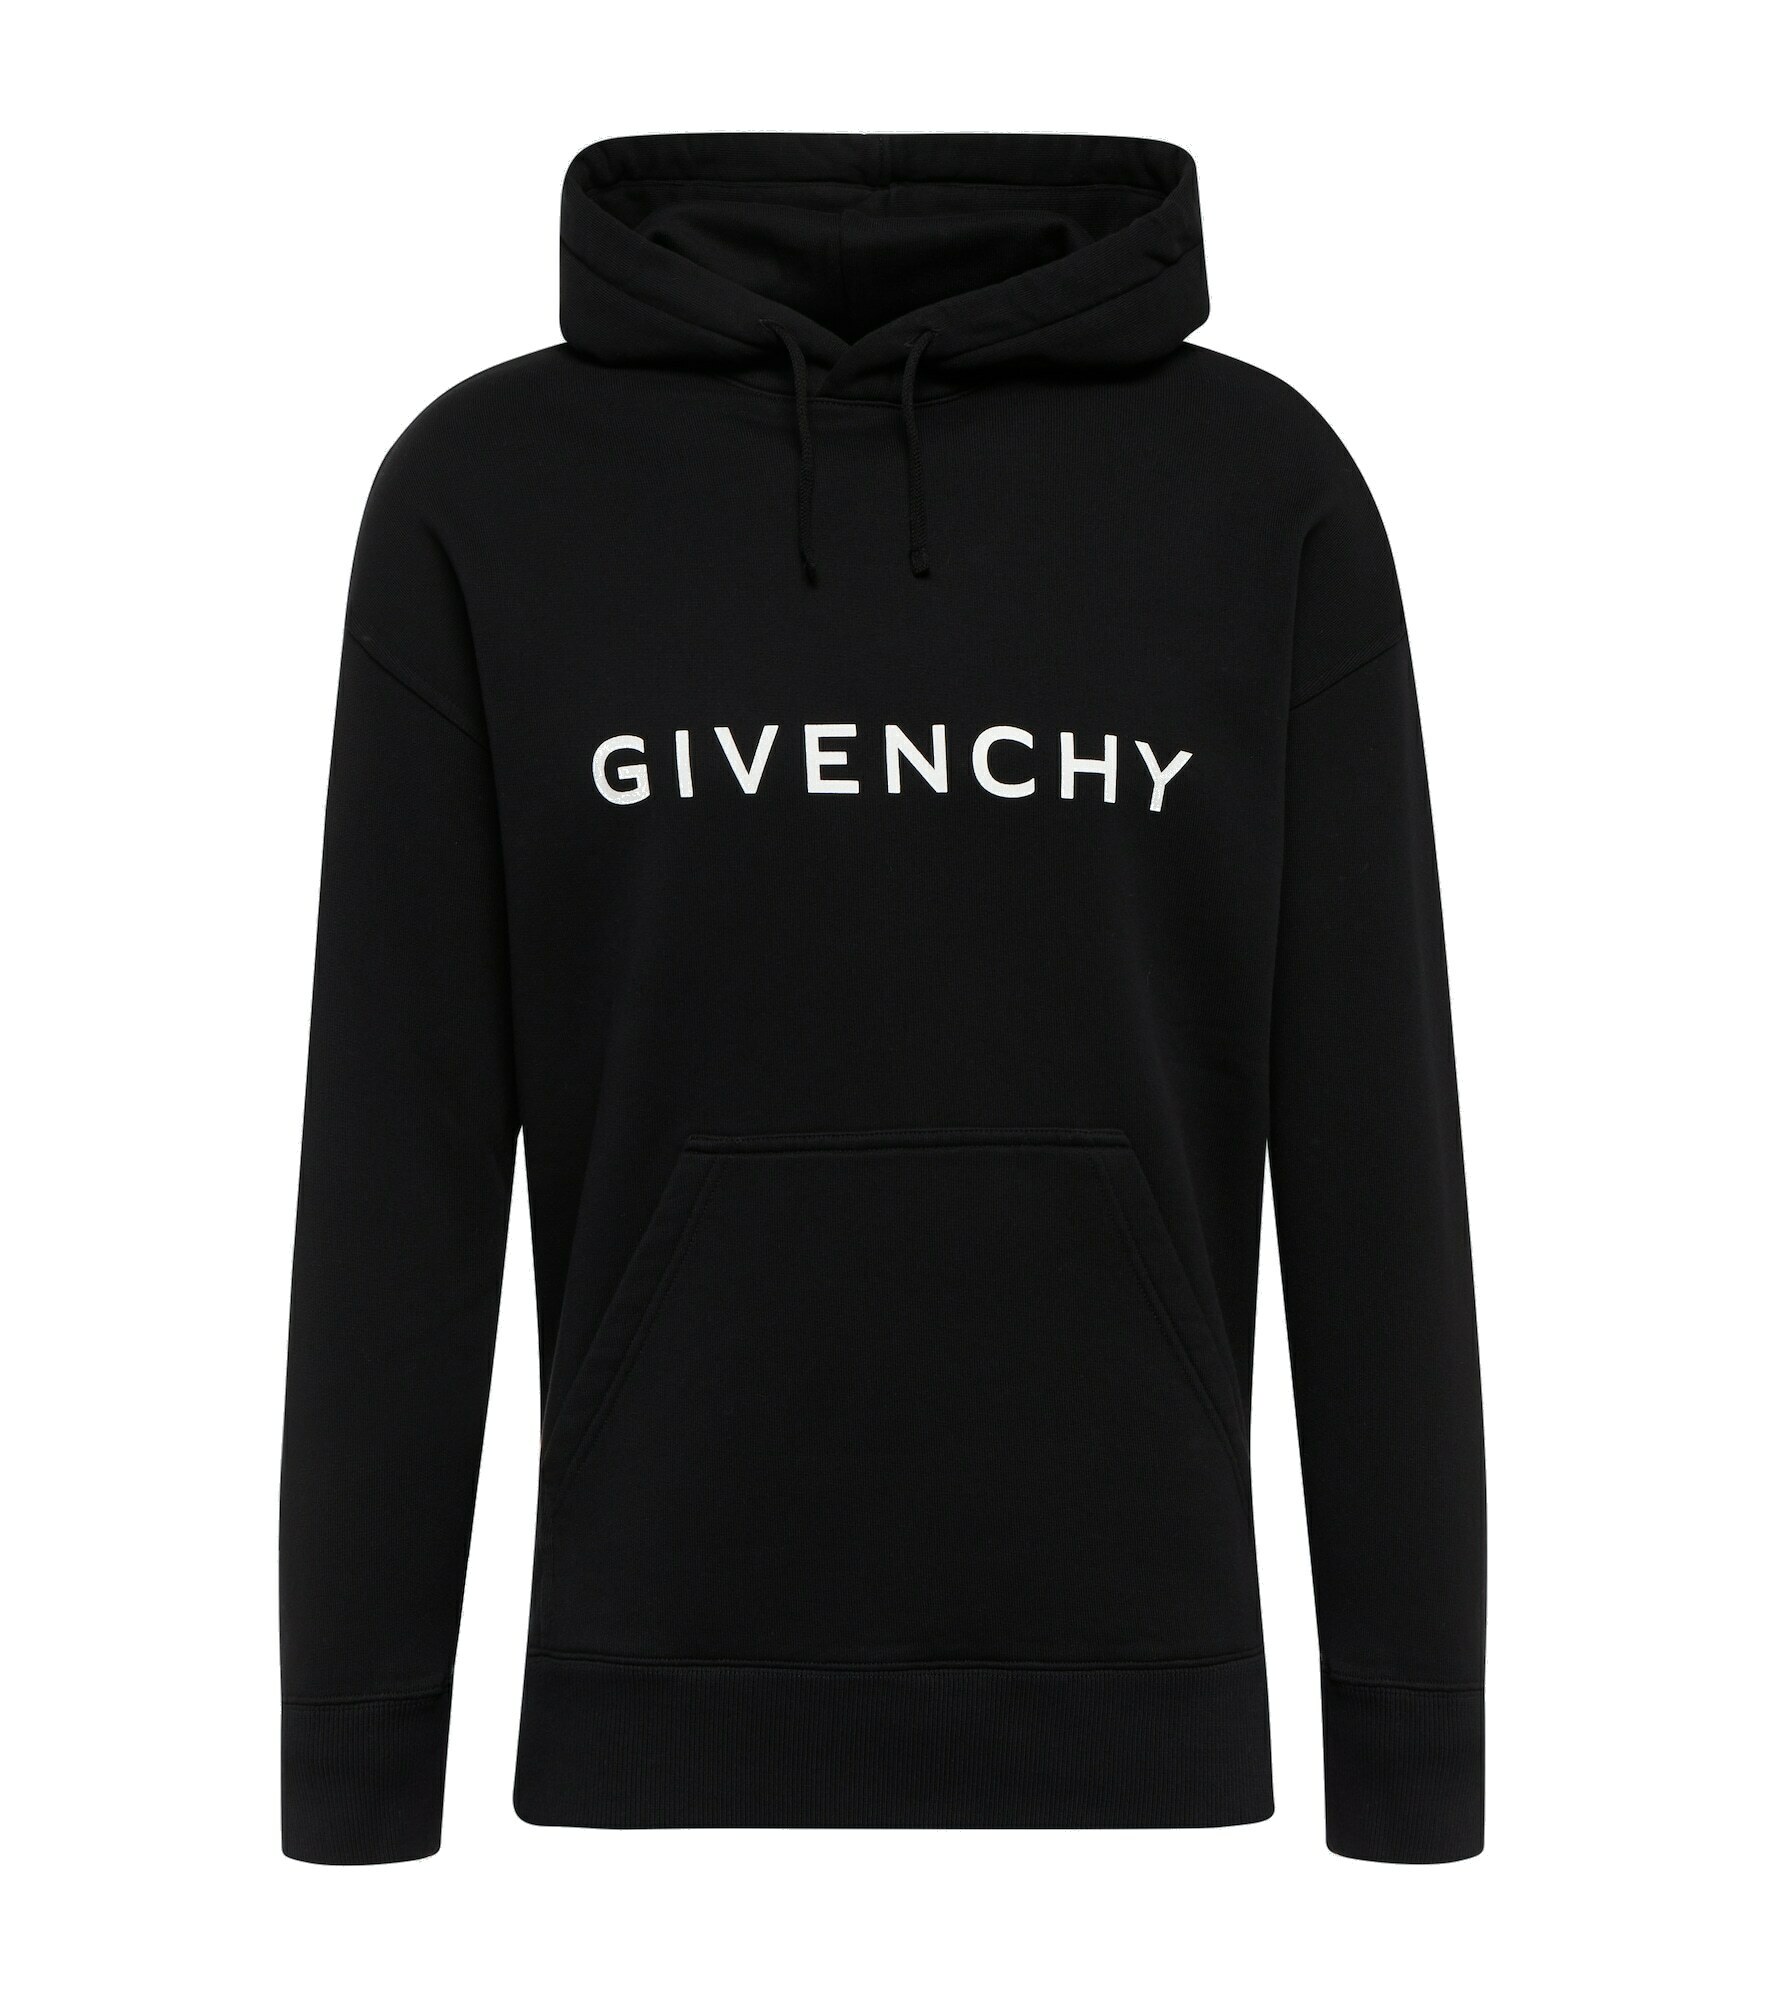 Givenchy - Archetype logo cotton jersey hoodie Givenchy